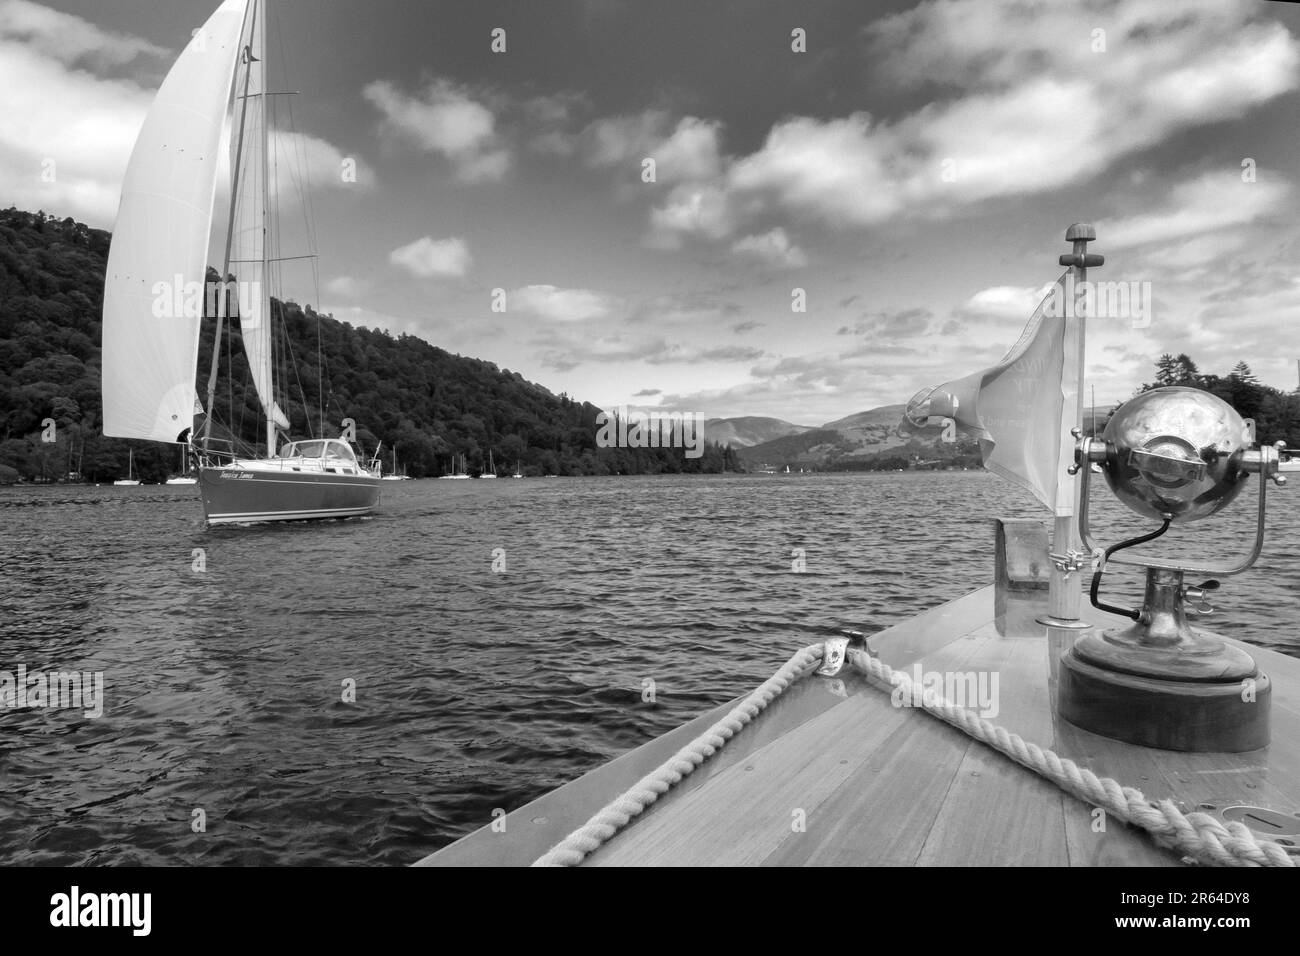 View from the vintage launch Penelope cruising on Lake Windemere in the Lake District UK Stock Photo